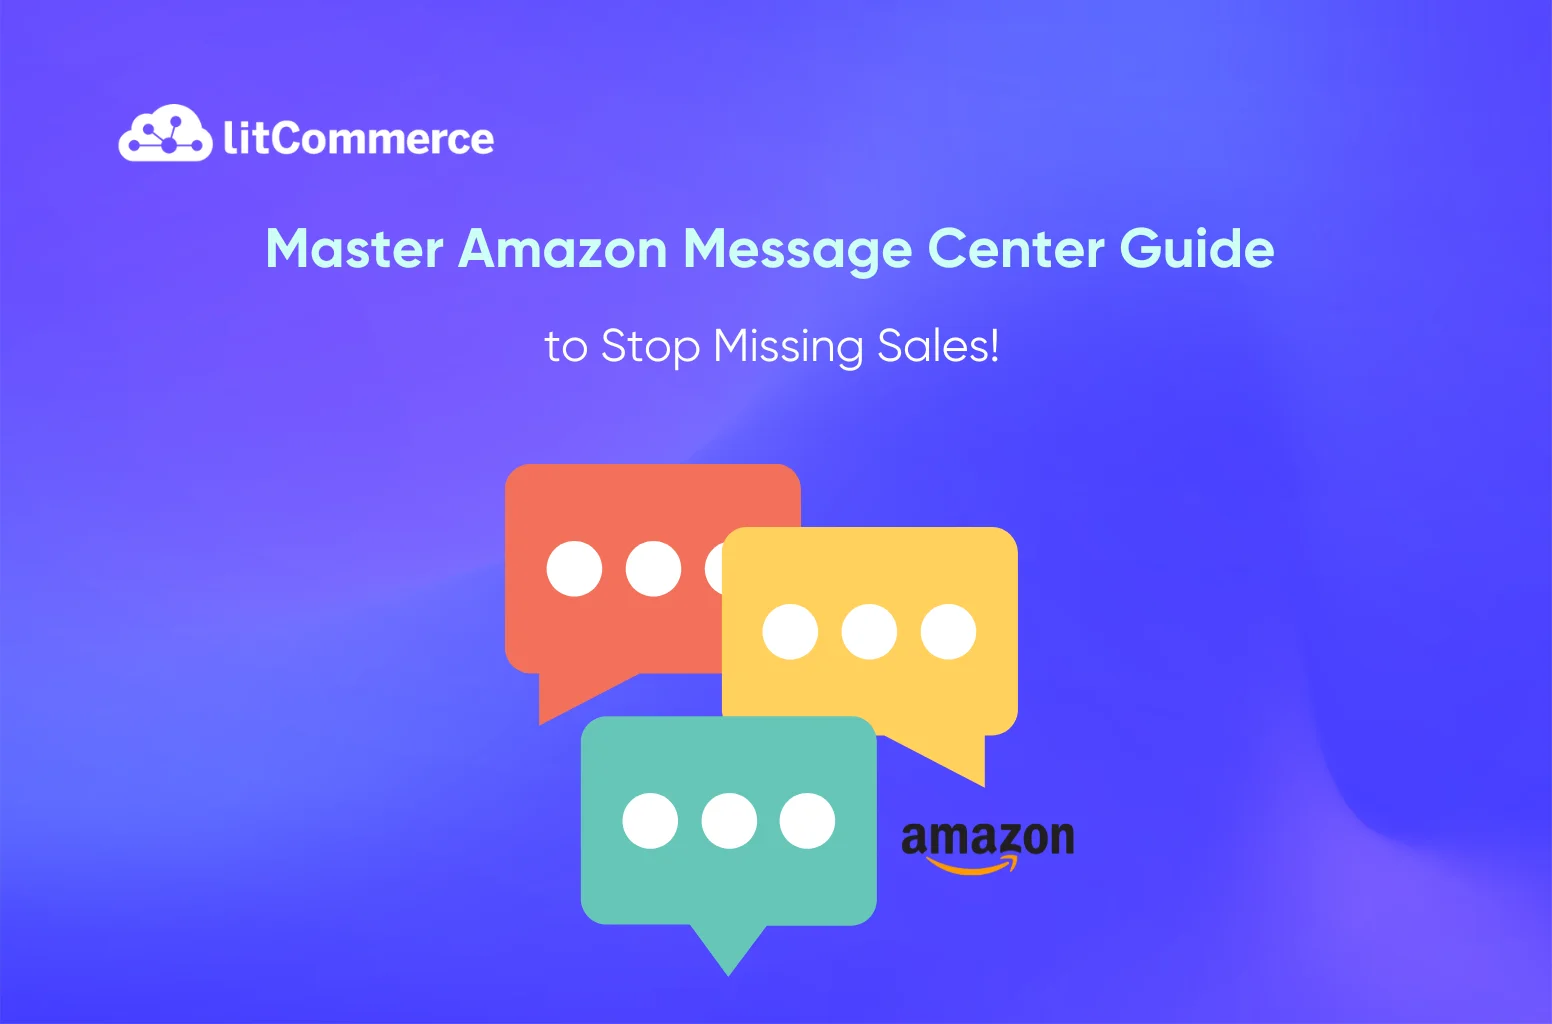 Master Amazon Message Center Guide to Stop Missing Sales!